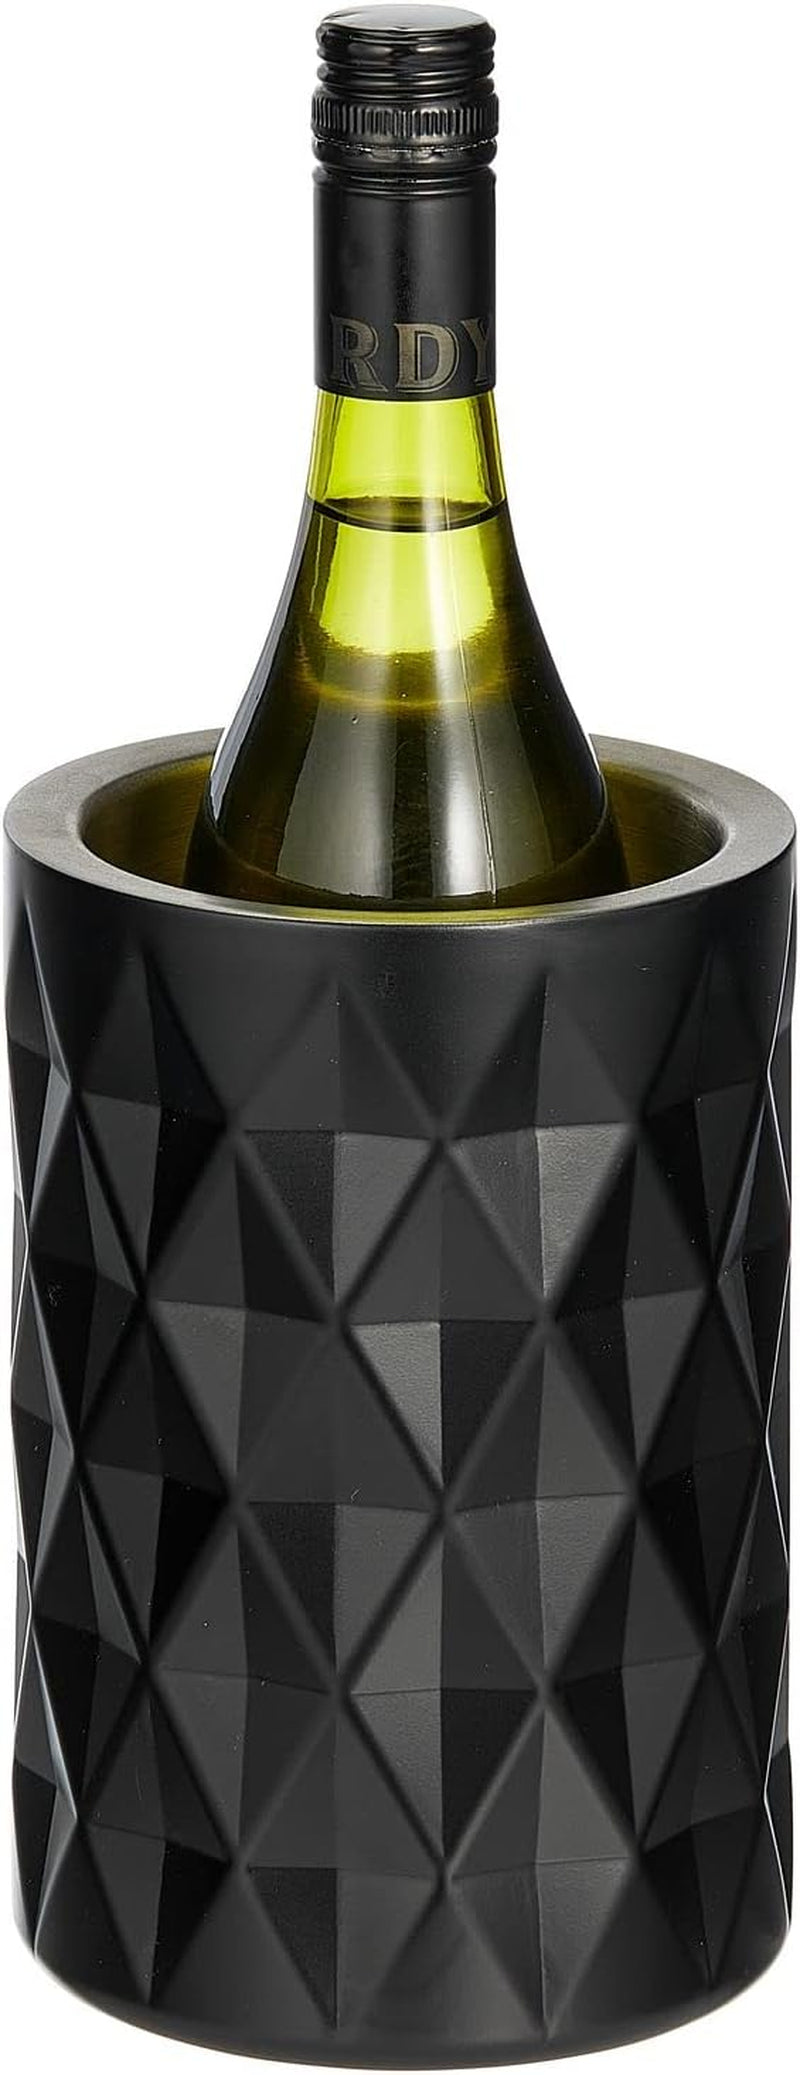 mDesign Single Bottle Wine Chiller - Ice Bucket Cooler for Kitchen, Bar, Party Decor - Holds Cold Wine, Champagne, Beer, Ready-to-Drink Cocktail Utensils, Serving Tongs - Black Marble